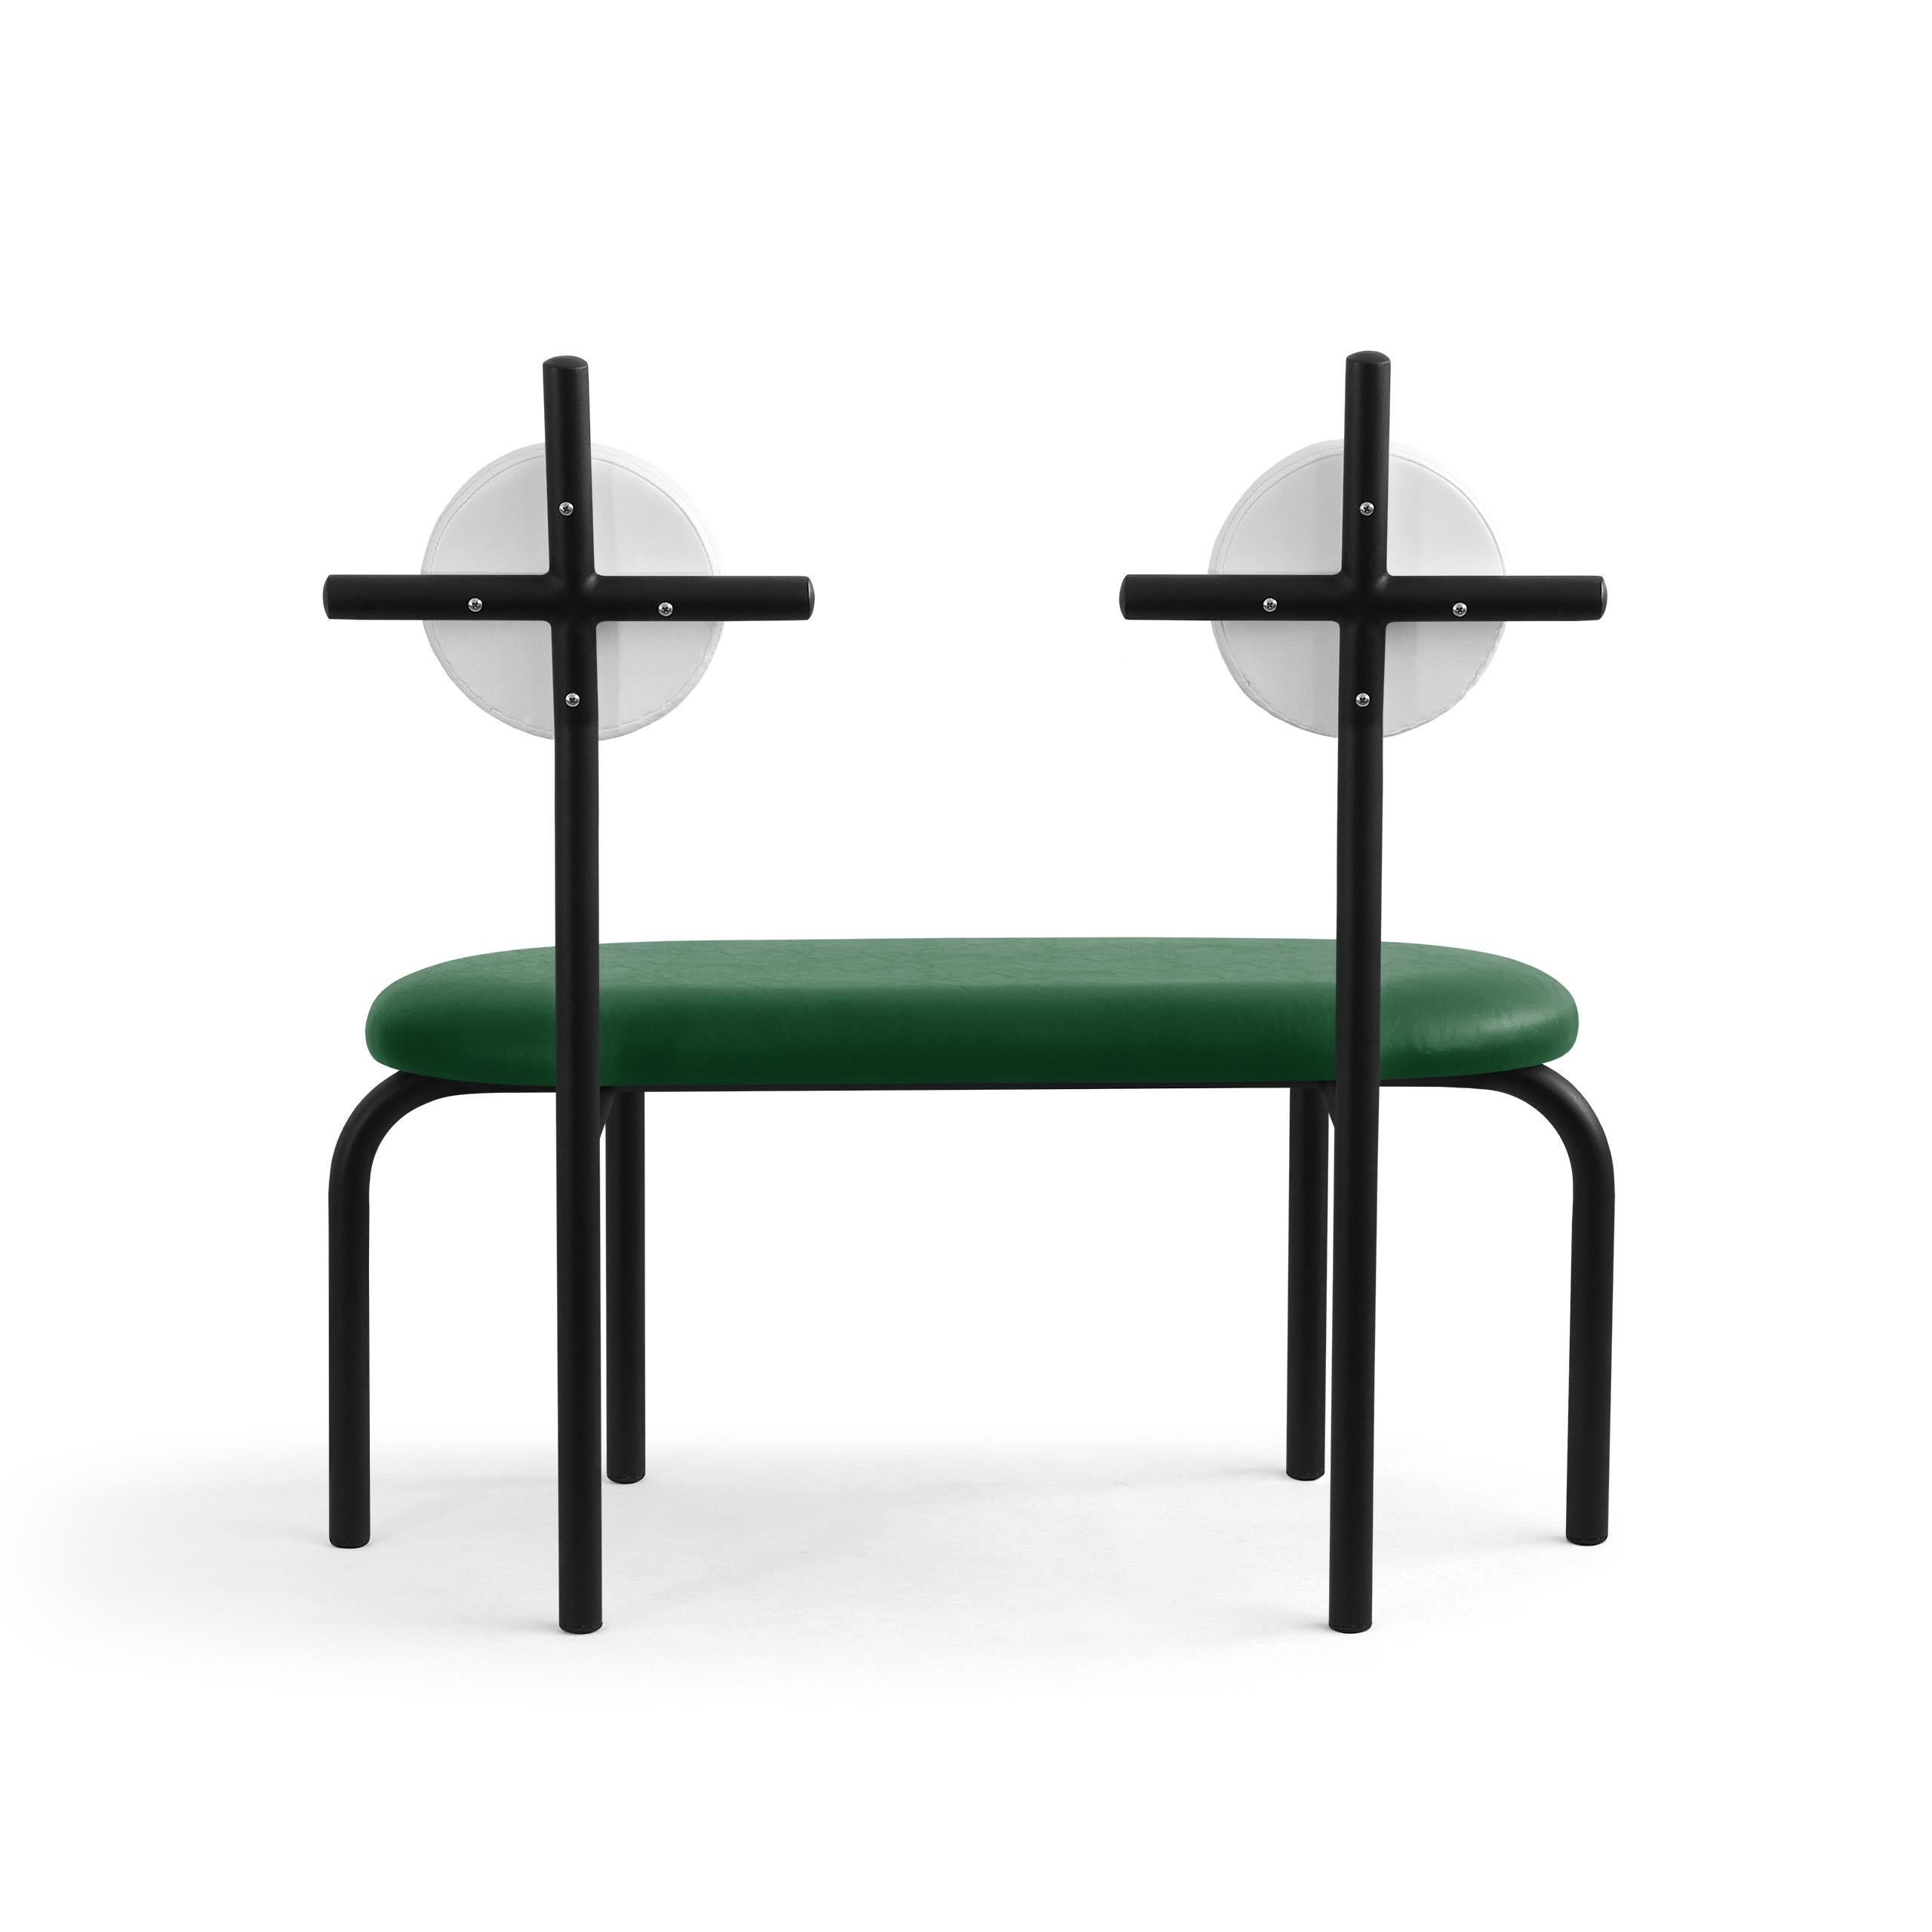 PK17 Impermeable Loveseat, Green Seat & Black Metal Structure by Paulo Kobylka In New Condition For Sale In Londrina, Paraná